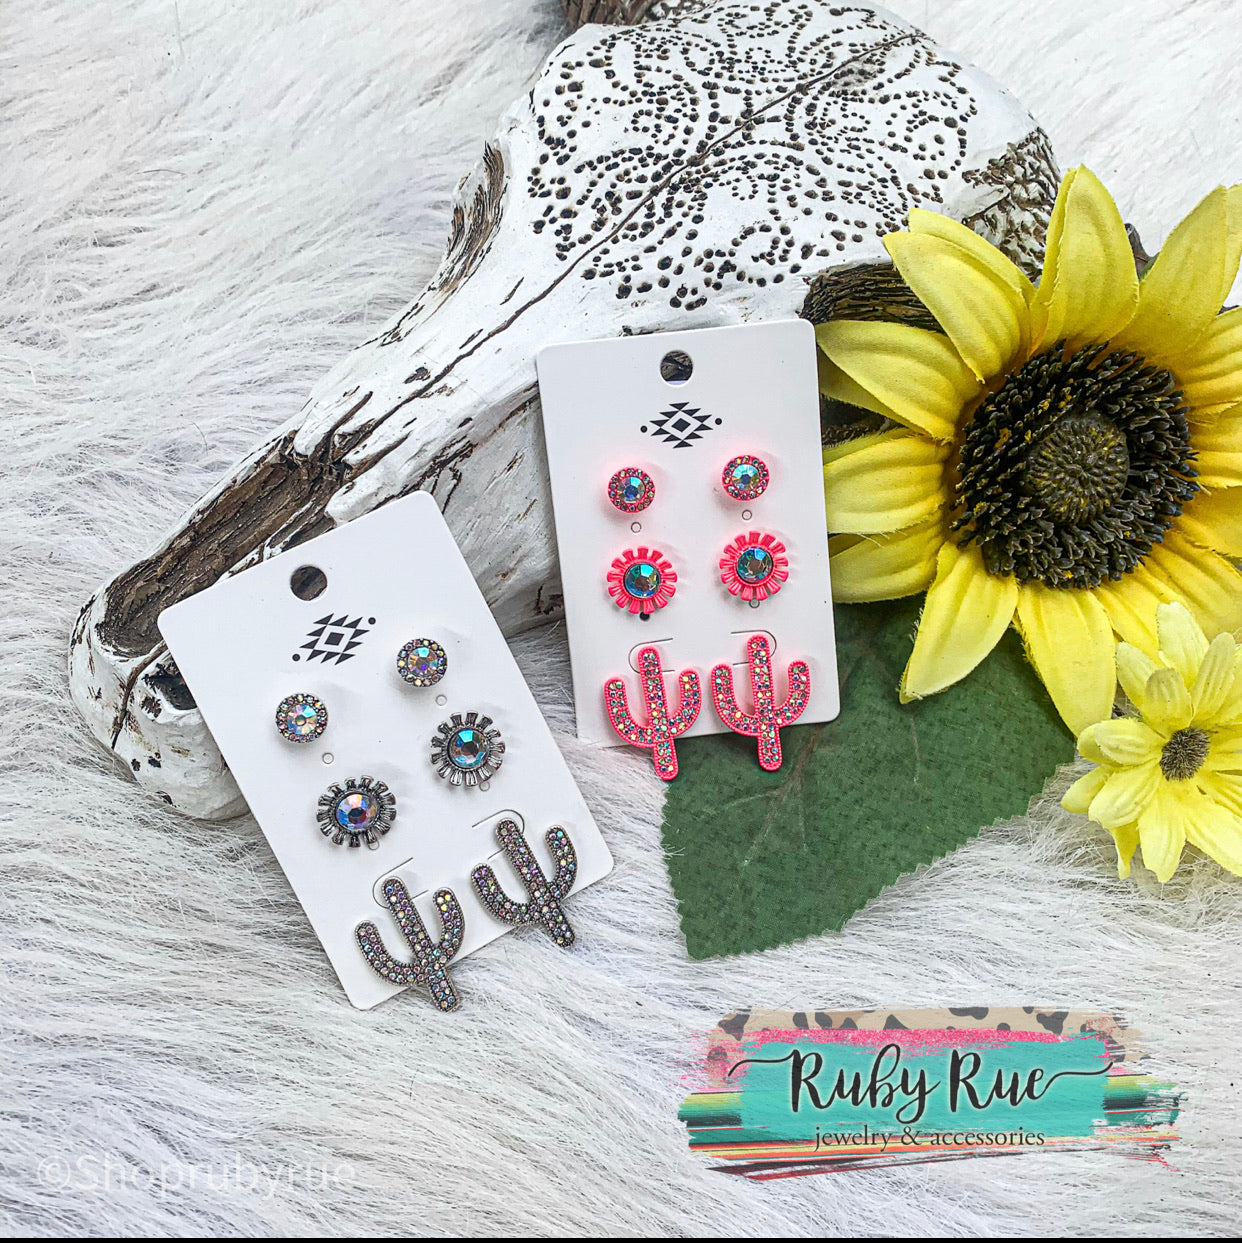 Cactus Earring Set - Ruby Rue Jewelry & Accessories